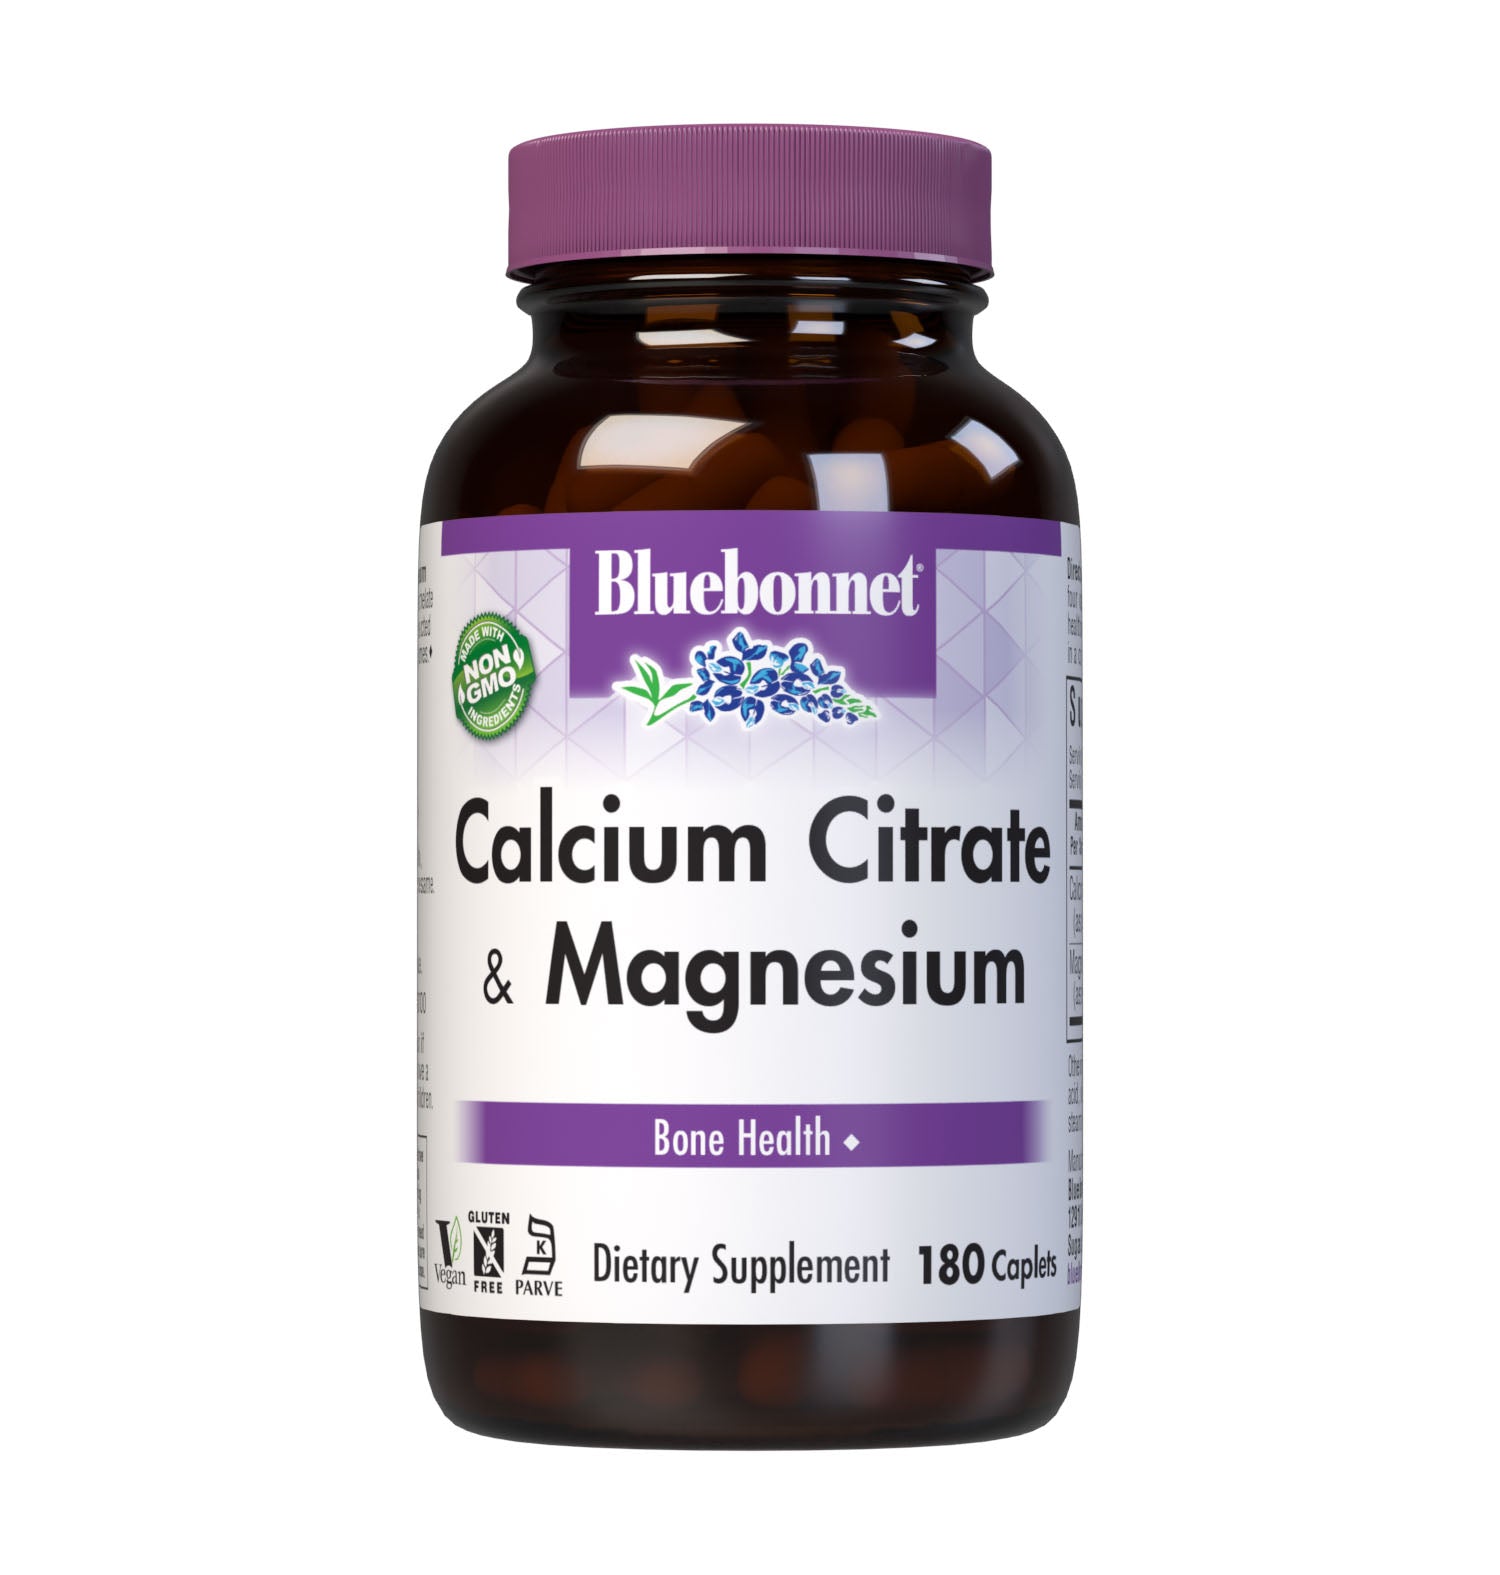 Bluebonnet's Calcium Citrate & Magnesium 180 Caplets are formulated with calcium in a chelate of calcium citrate and magnesium from reacted magnesium aspartate for strong, healthy bones. #size_180 count